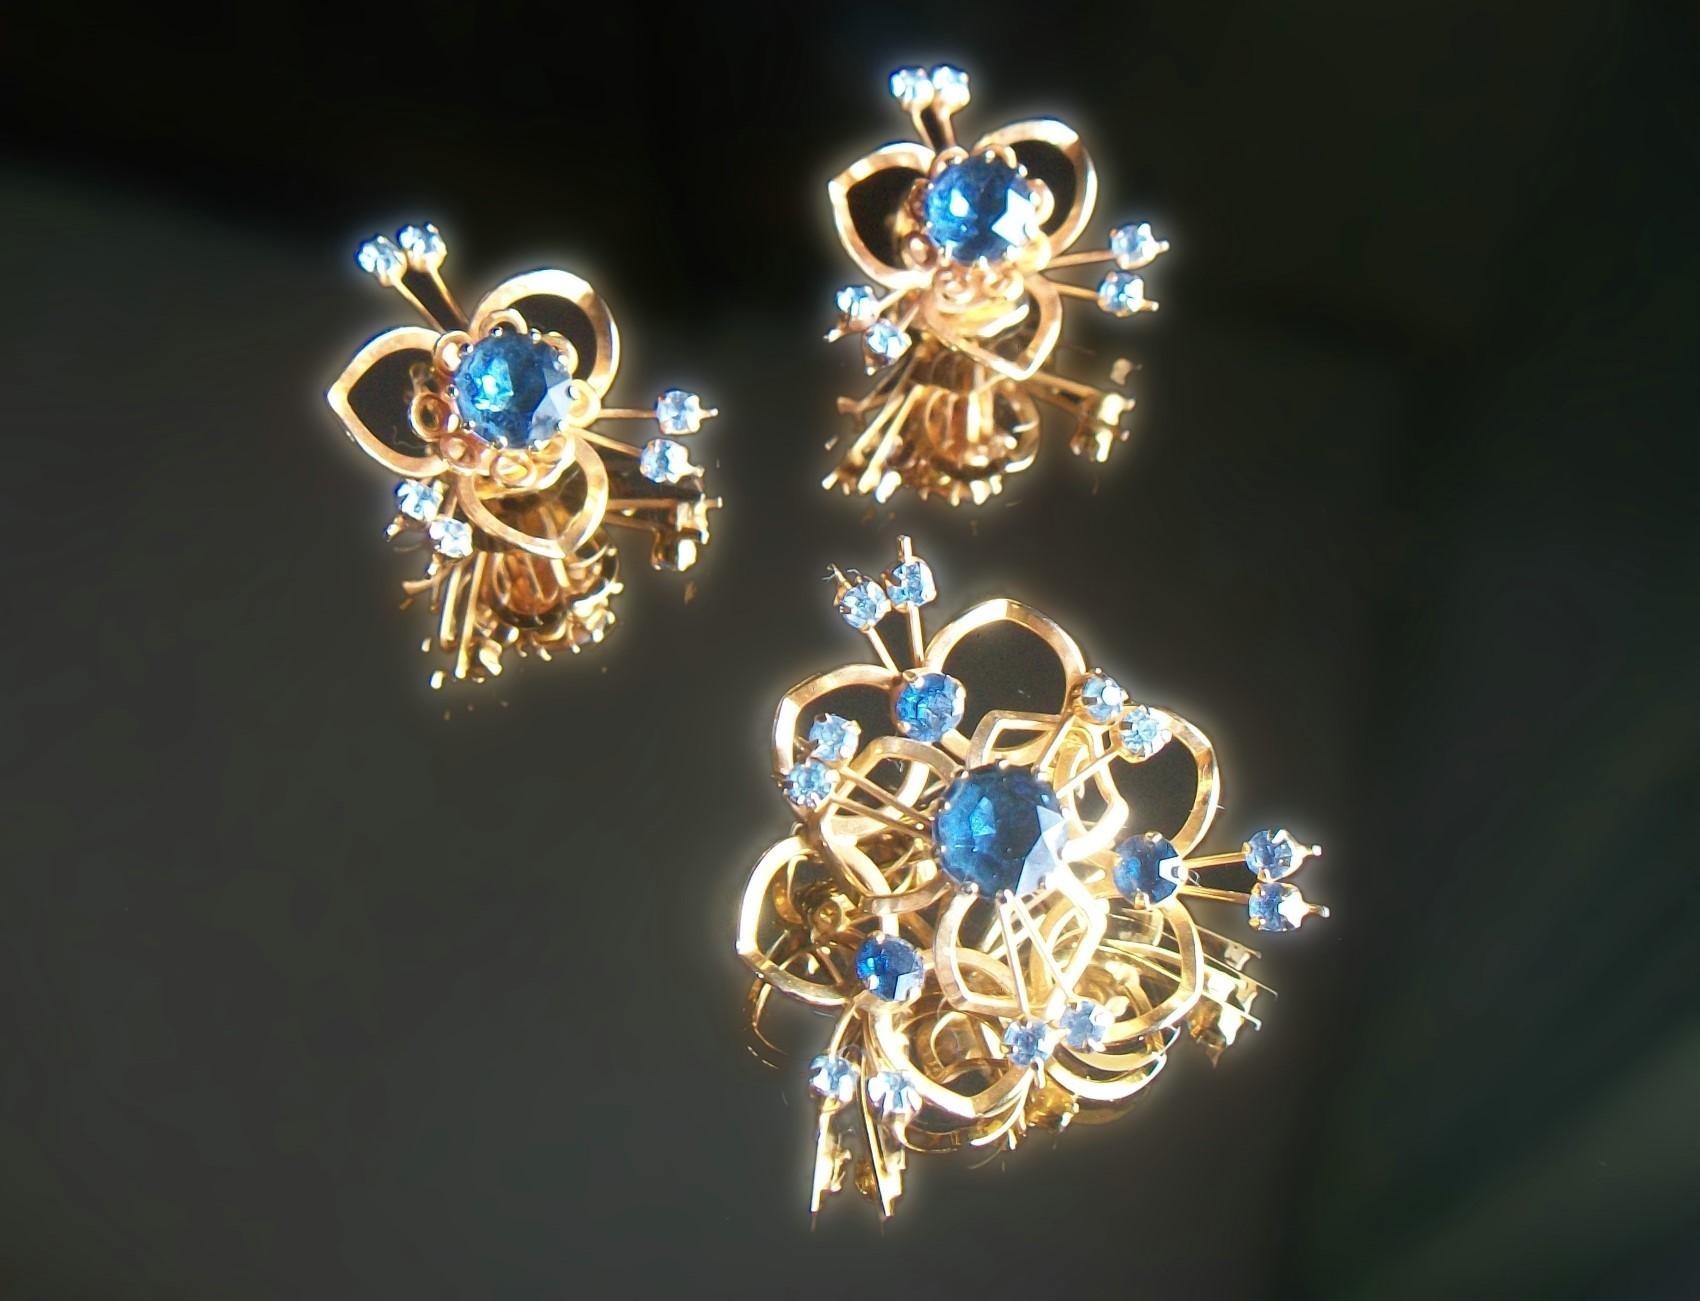 Mid Century Austrian crystal topaz and aquamarine ear clips and brooch/pin in gold tone frames - great quality - unsigned - Austria - circa 1950's.

Excellent vintage condition - safety catch missing on brooch/pin (still closes and holds) - minor